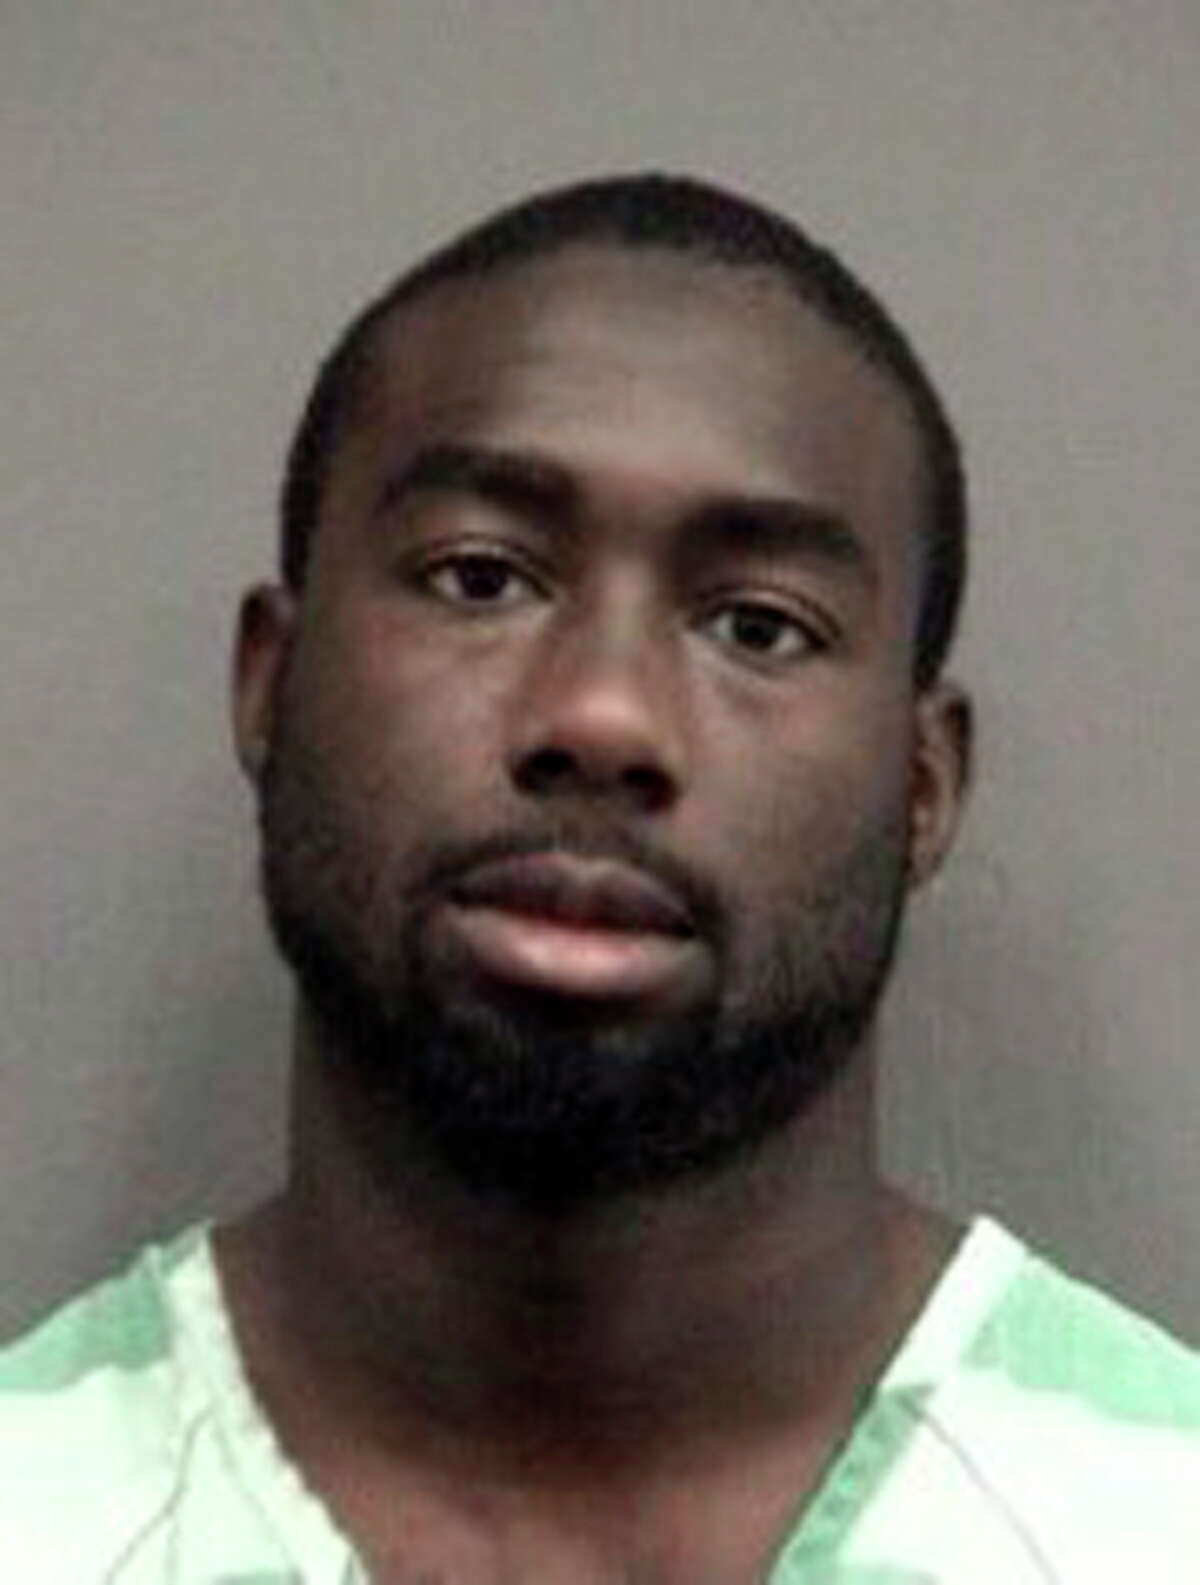 In this booking photo released by the Alachua County Sheriff's Office, Florida football player Chris Rainey is shown in a booking photo on Tuesday, Sept. 14, 2010. Rainey has been charged with aggravated stalking, a third-degree felony. Rainey was released from the Alachua County Jail on his own recognizance Tuesday and ordered to have no contact with the alleged victim. (AP Photo/Alachua County Sheriff's Office)